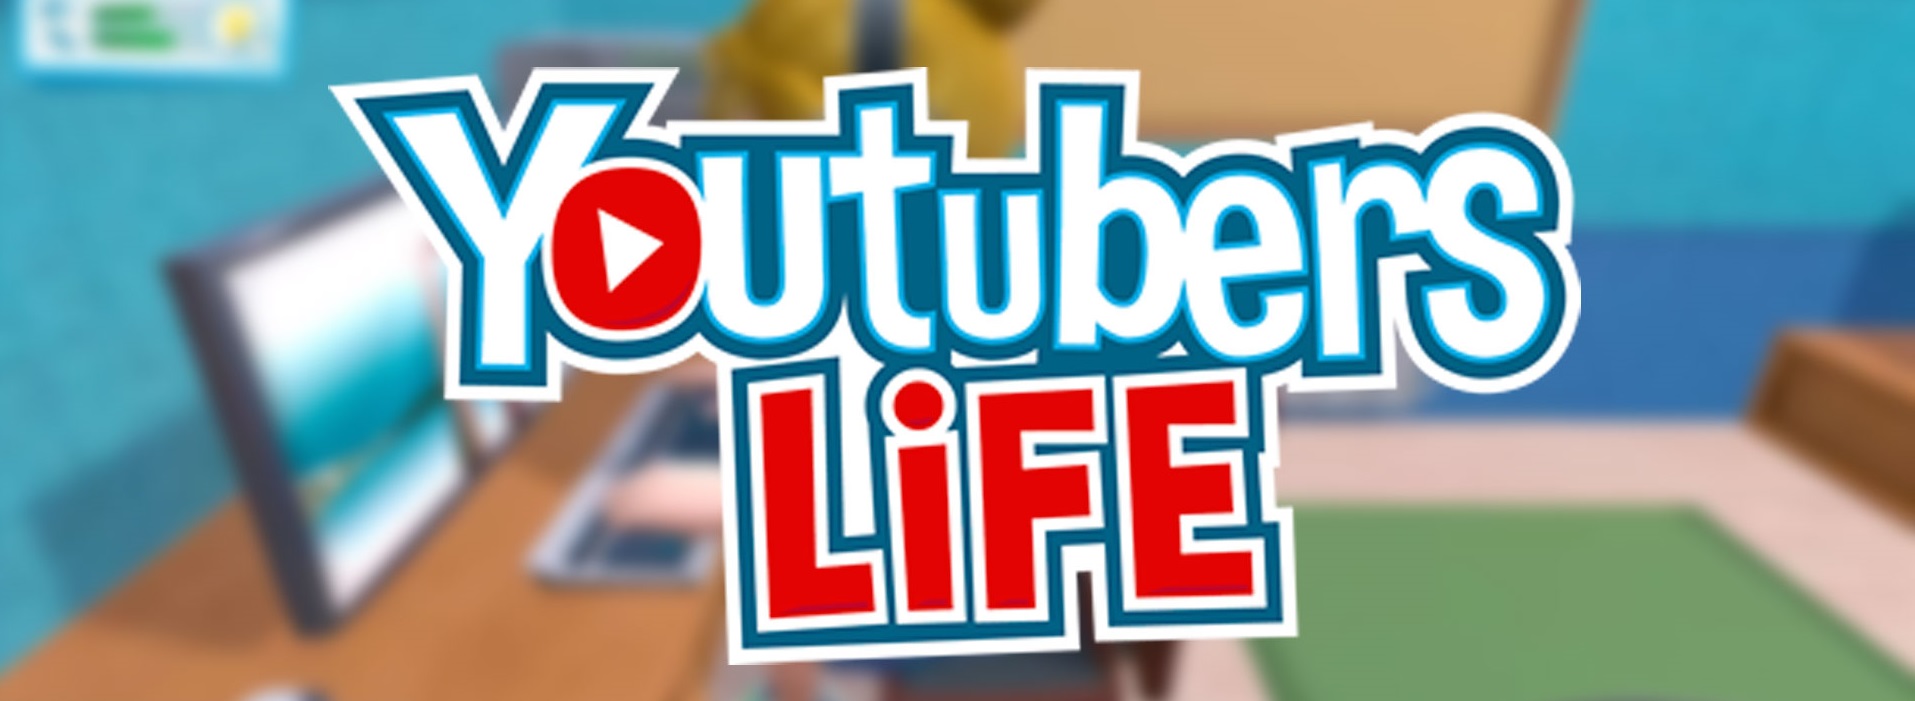 Youtubers Life Trainer 1 5 5 Latest Version